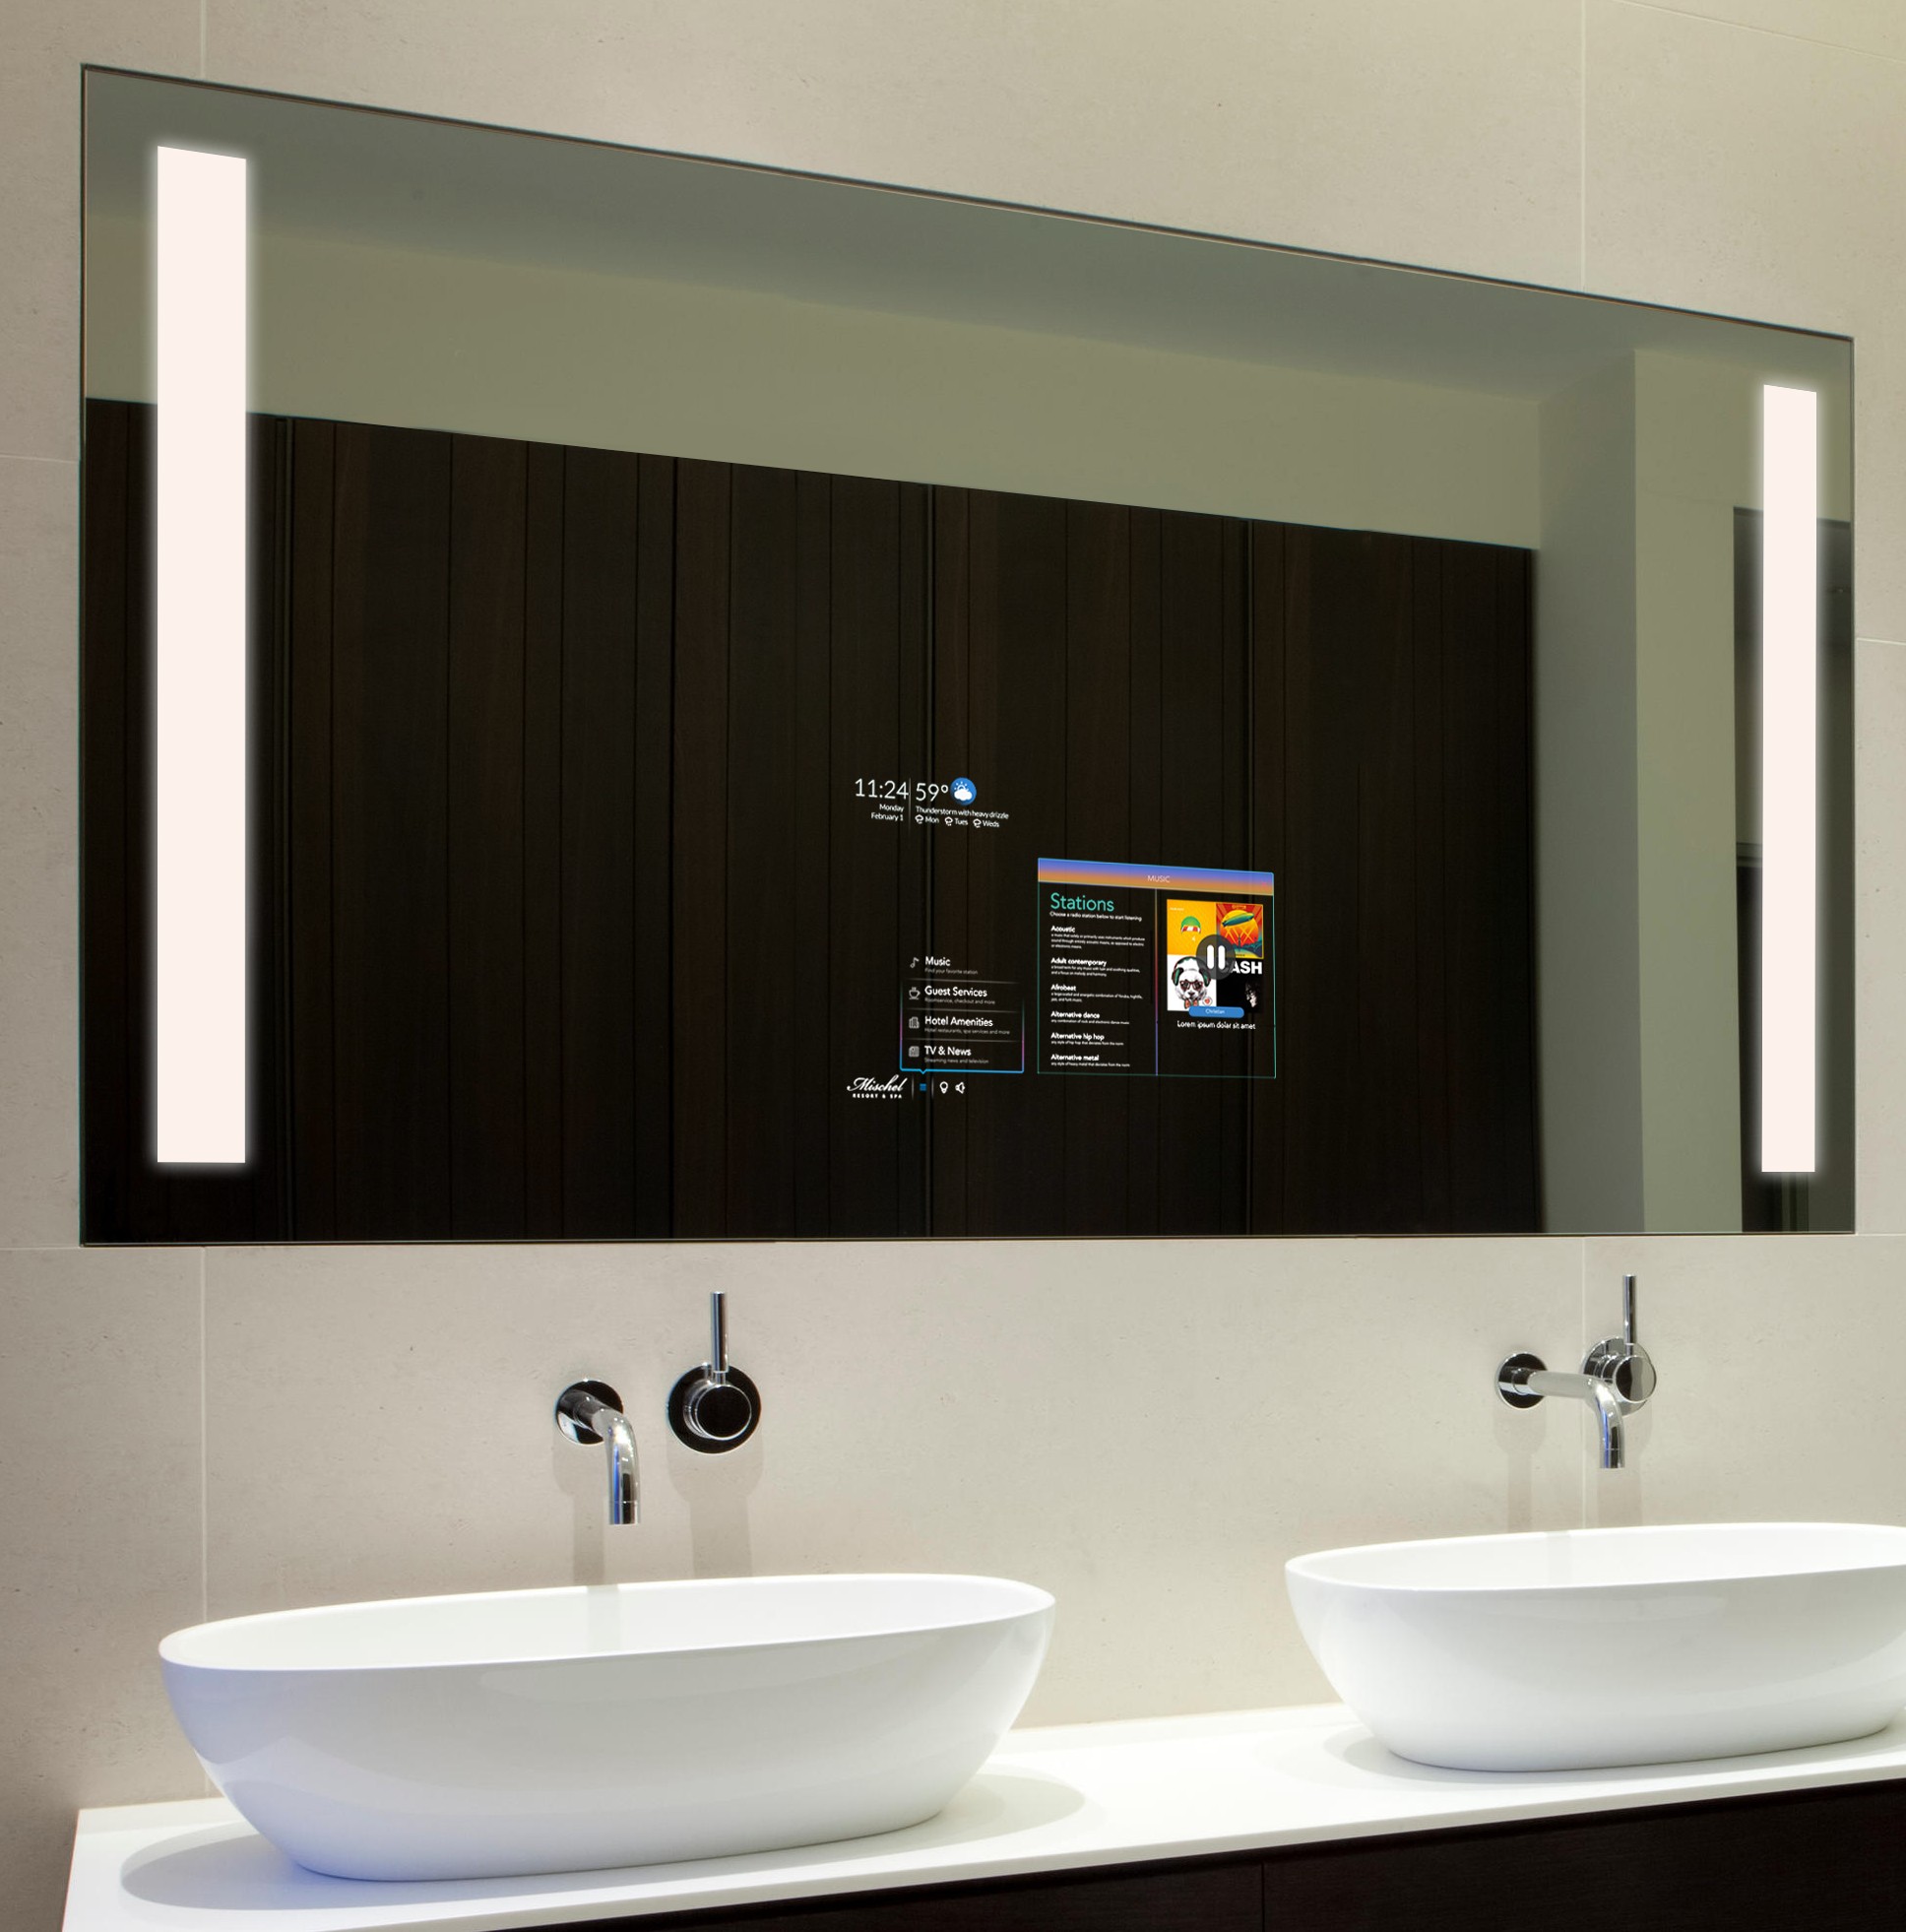 Smart mirror for hospitality market allows control connection